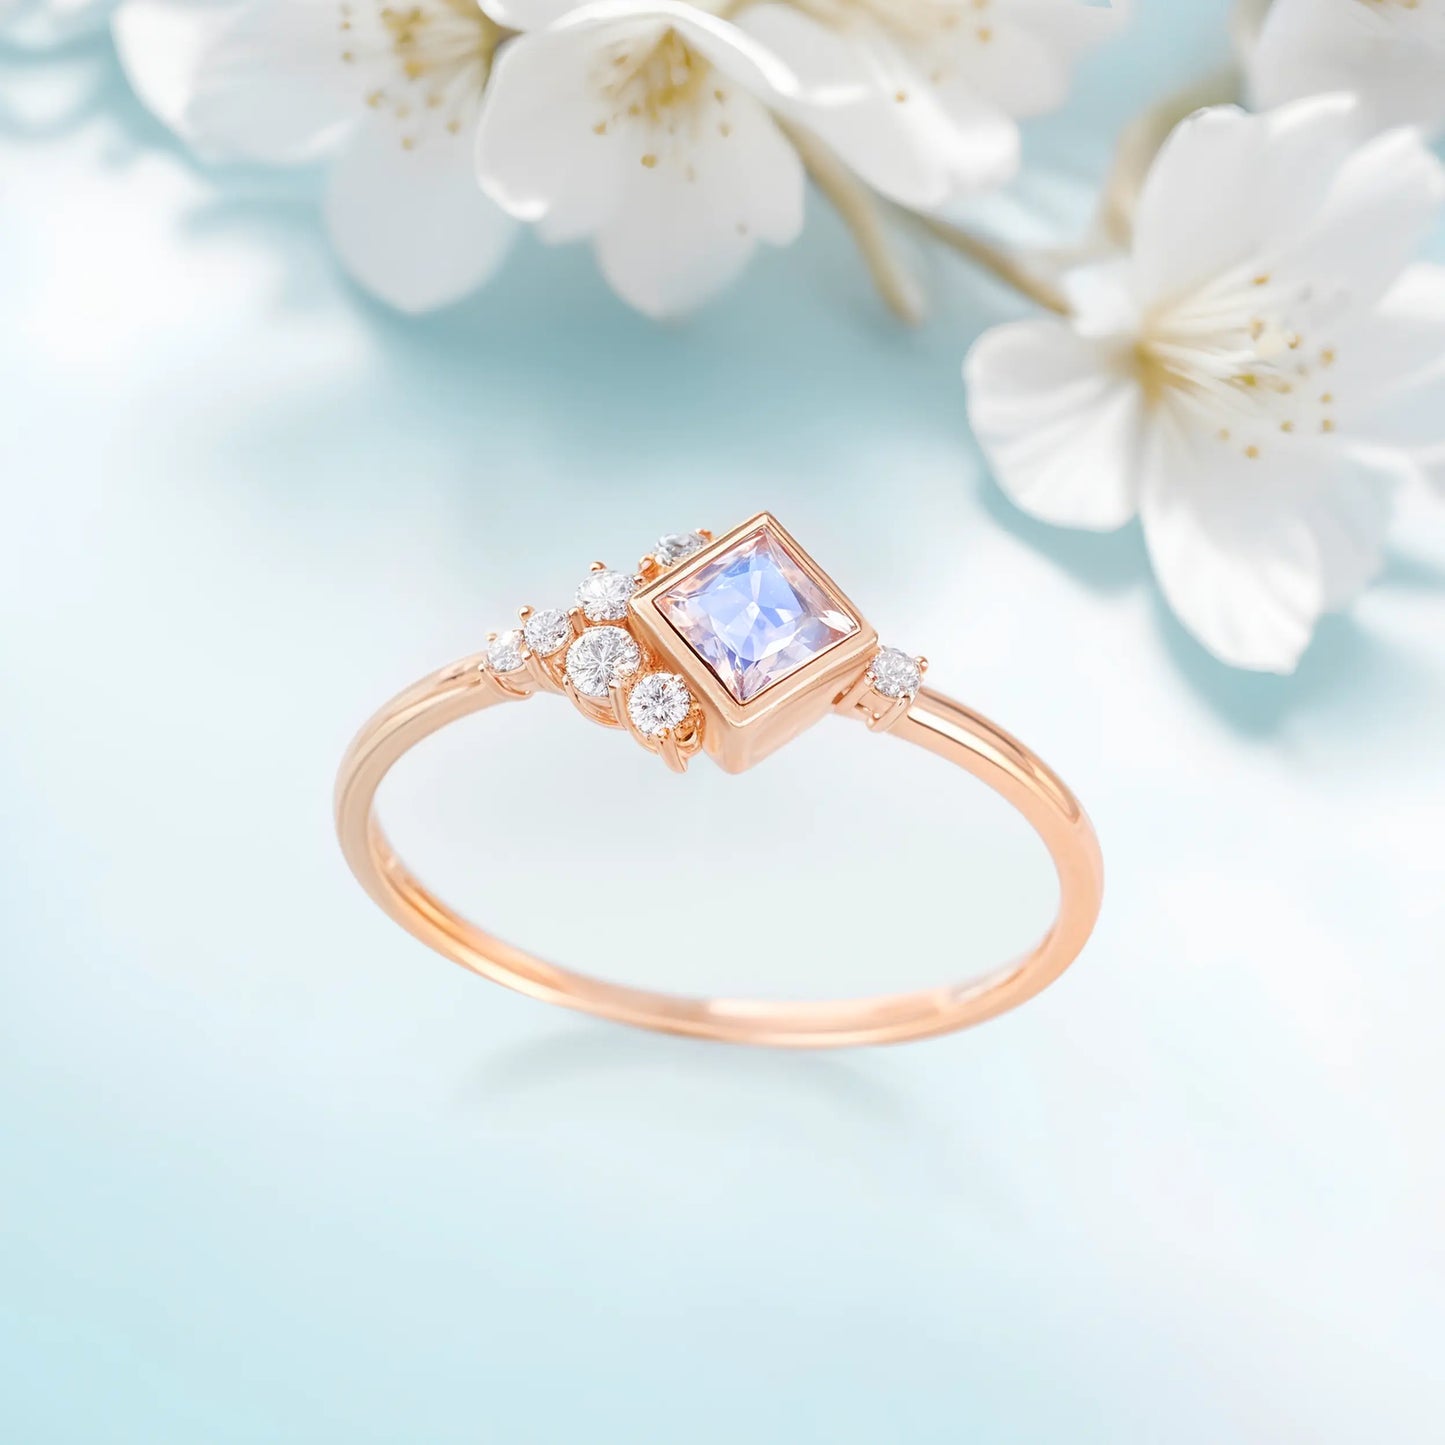 Engagement ring with a Moonstone and white Zircon on a table with flowers